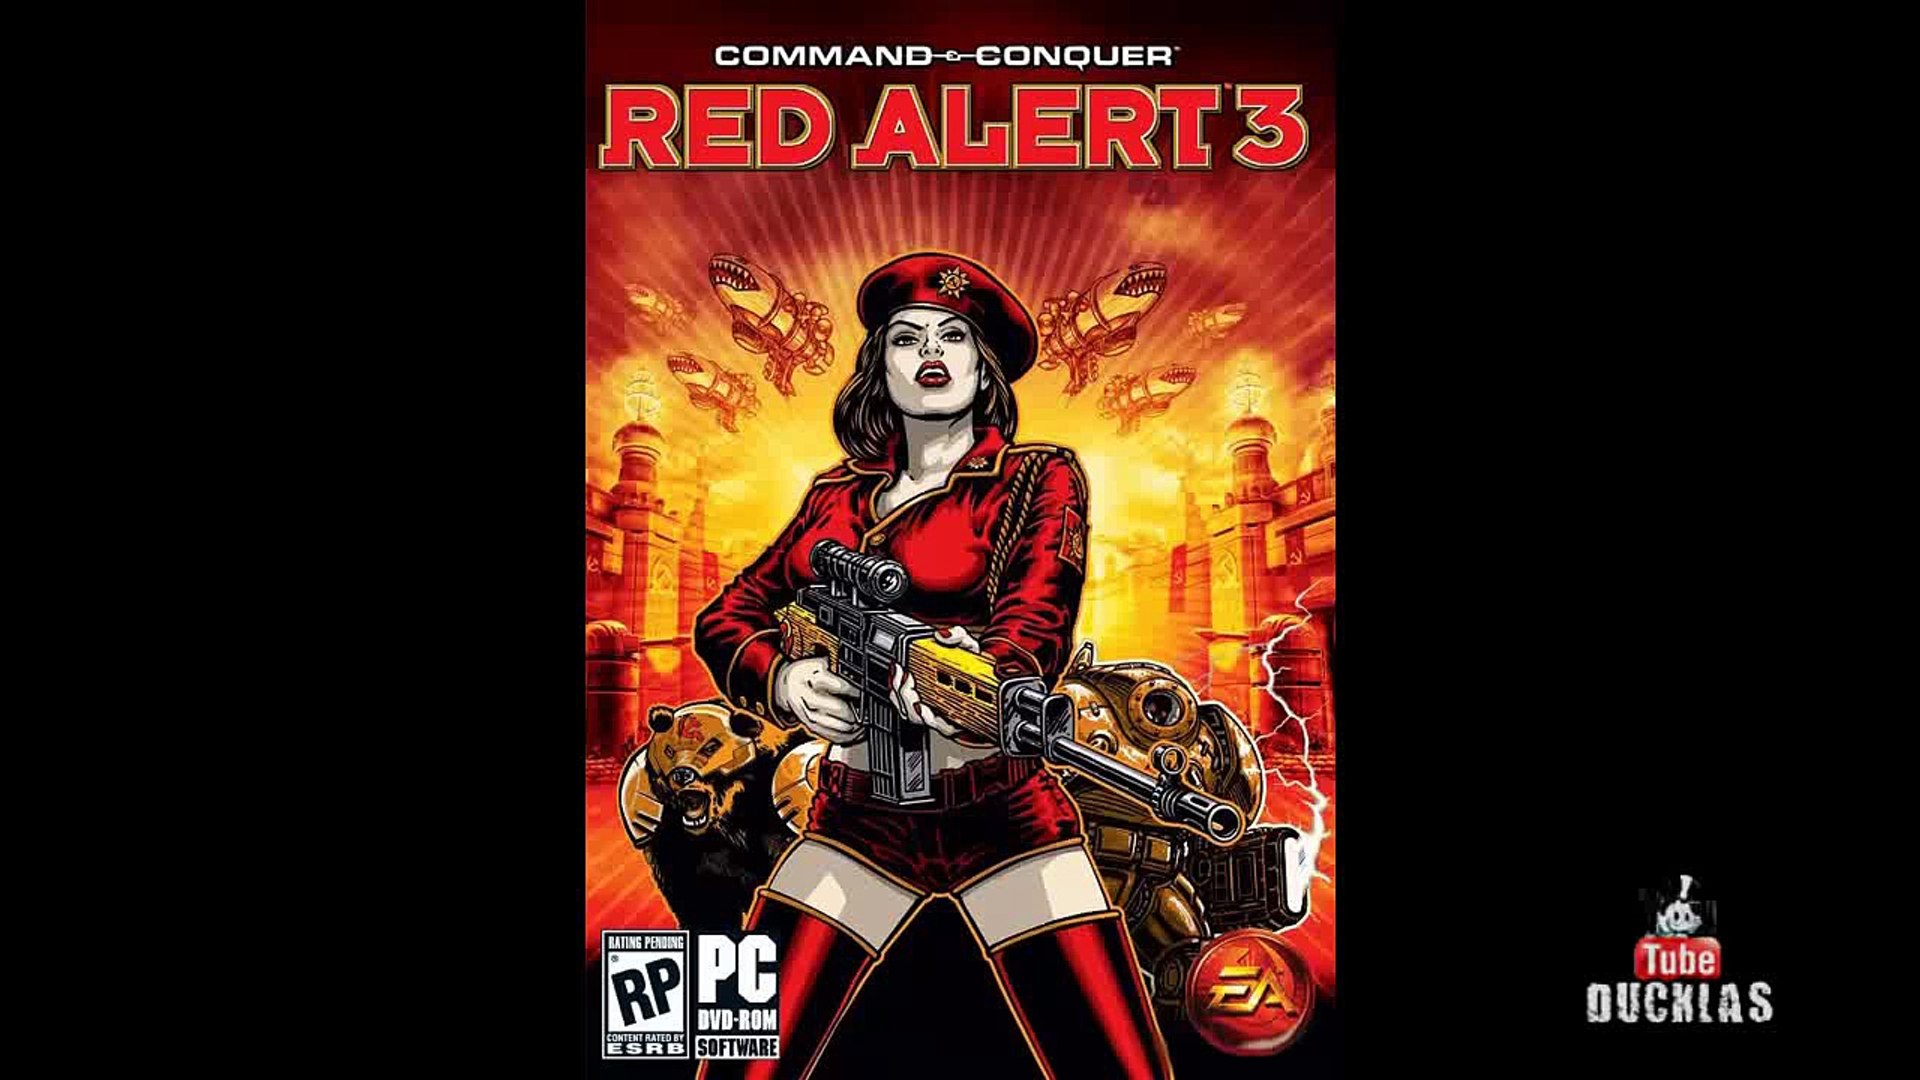 Command & Conquer: Red Alert 3. Command & Conquer: Red Alert 3 марш. Red Alert 3 OST. Red Alert 2 - Hell March 2. Red alert soundtrack